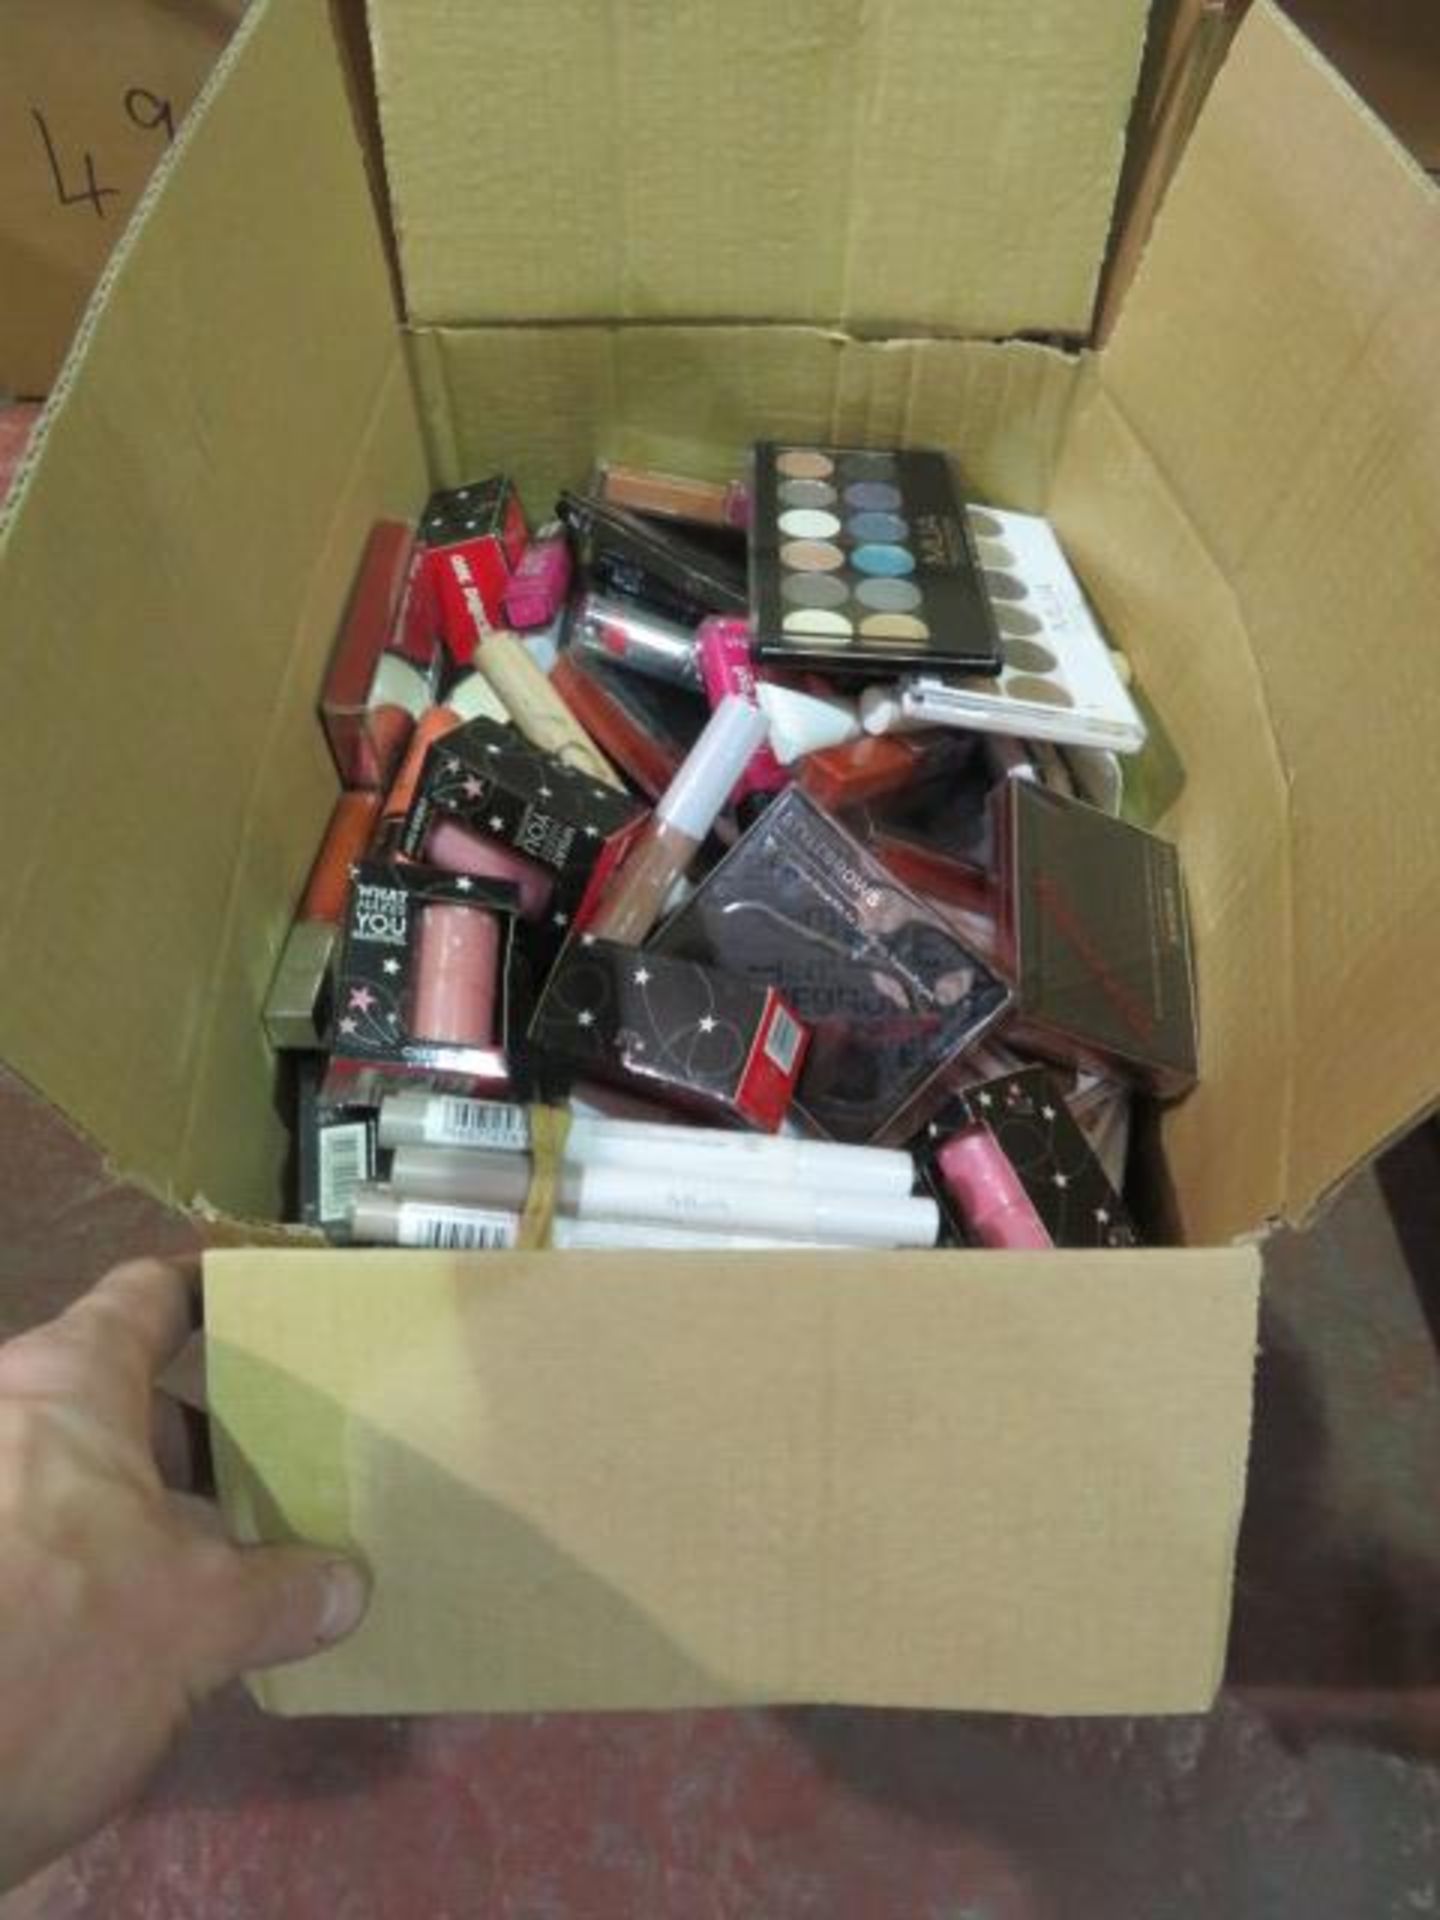 Circa. 200 items of various new make up acadamy make up to include: radiant under eye concealer... - Image 2 of 2